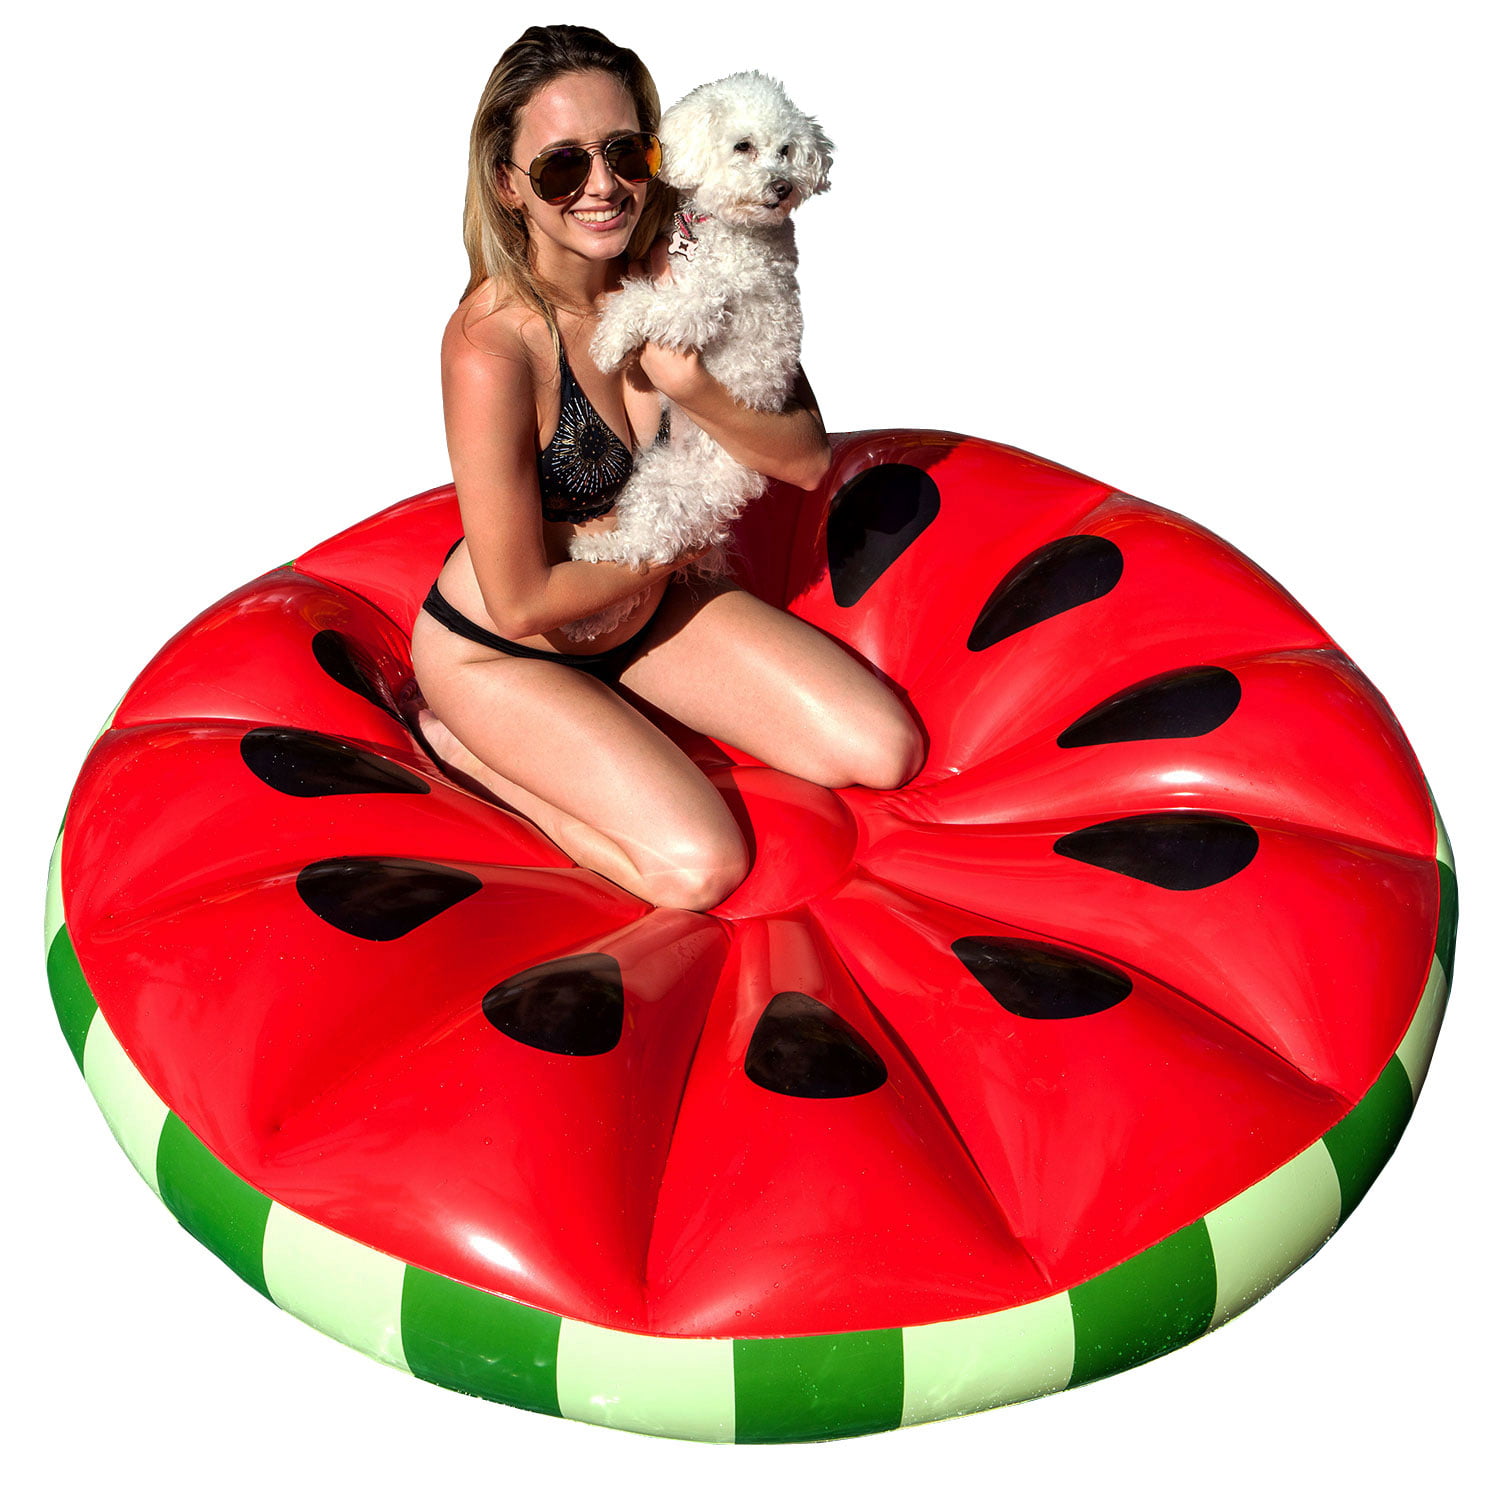 GIANT WATERMELON POOL FLOAT LOUNGE INFLATABLE PARTY EASY DEFLATE SUMMER FUN 6 FT 